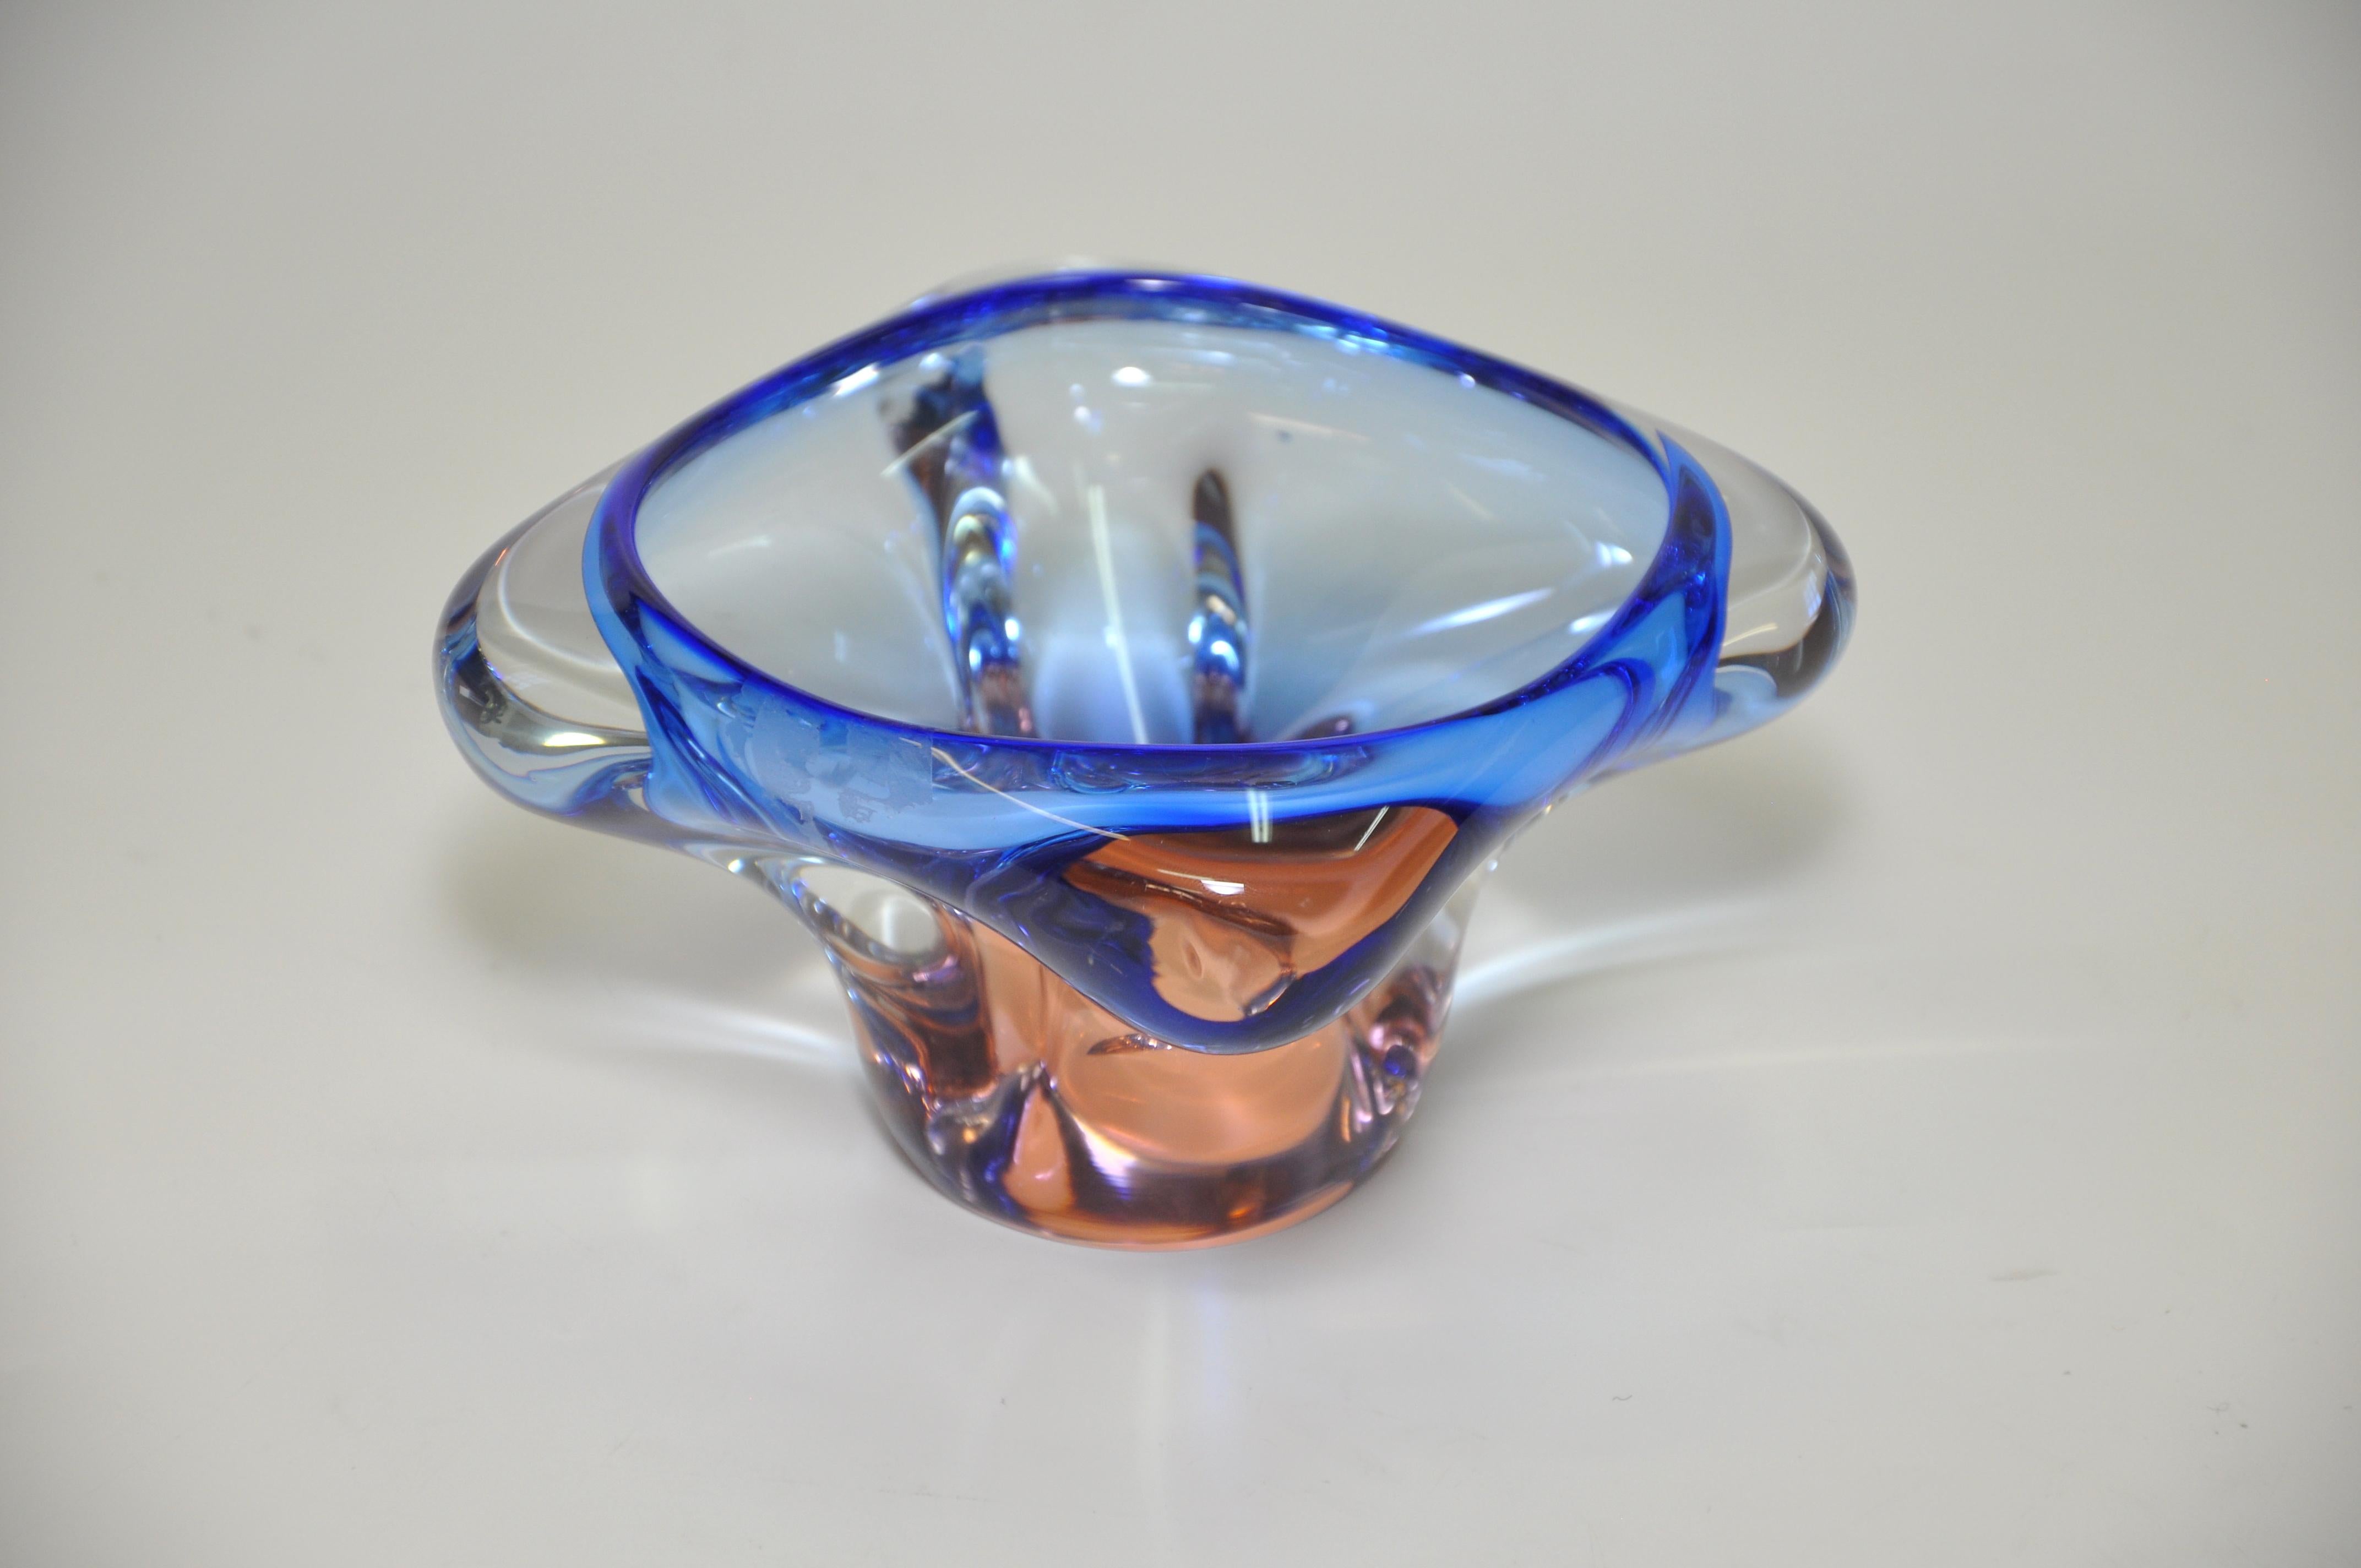 Stunning Vintage Blue Peach Art Glass Bowl Italian 

A stunning vintage piece of art glass in a strong blue complemented with a soft but still vibrant peach. This energetic piece is wonderful as it would look great matched with antique or